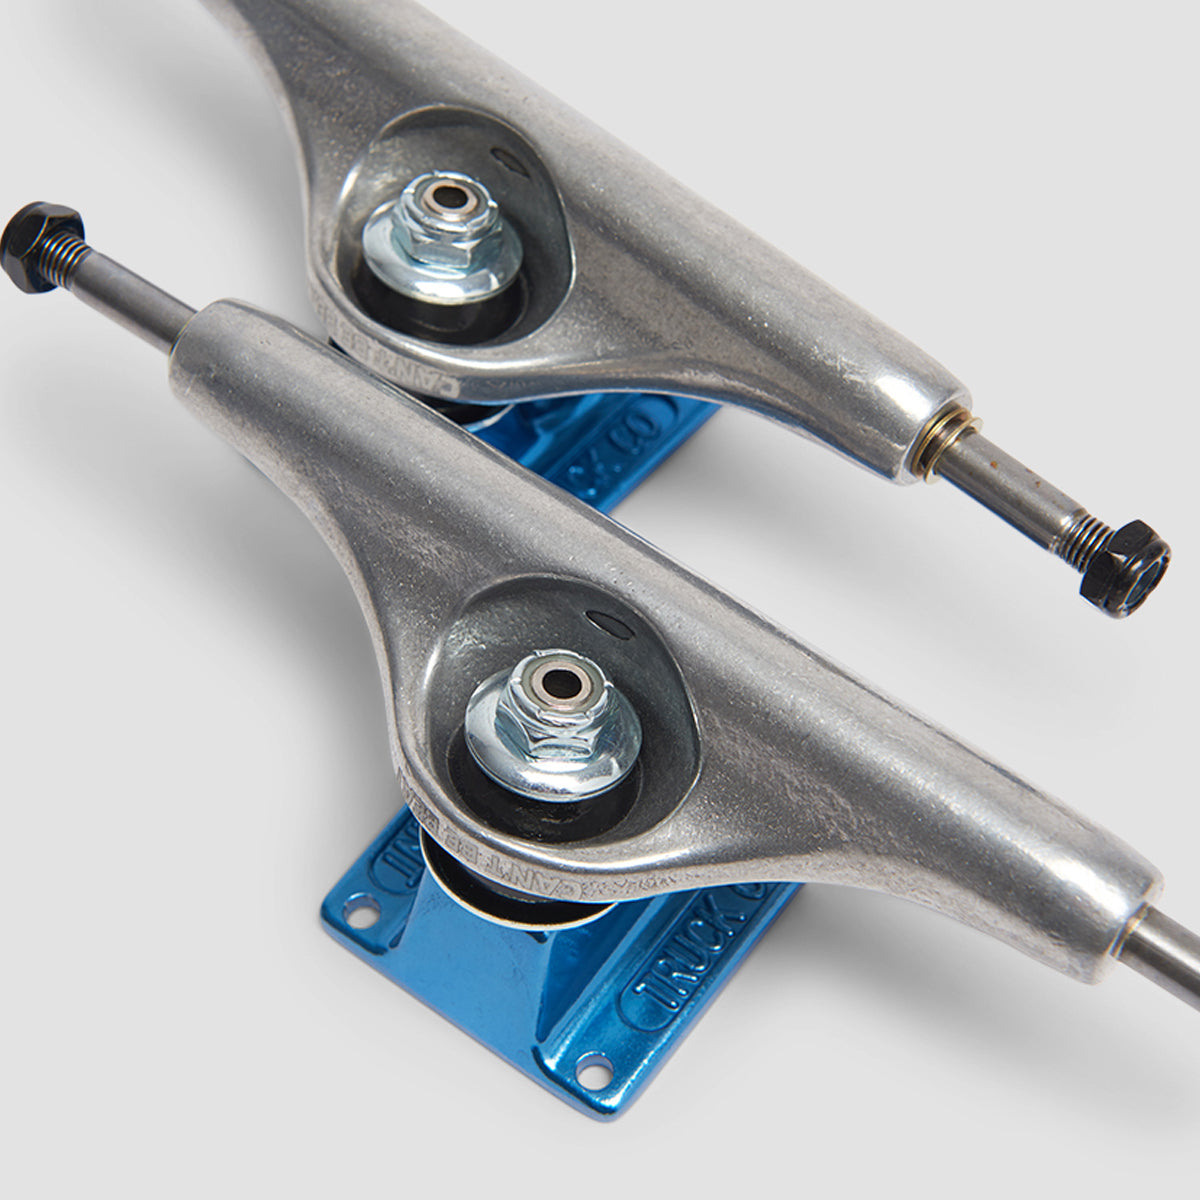 Independent Stage 11 149 Forged Hollow Cant Be Beat 78 Skateboard Trucks 1 Pair Silver/Blue - 8.5"